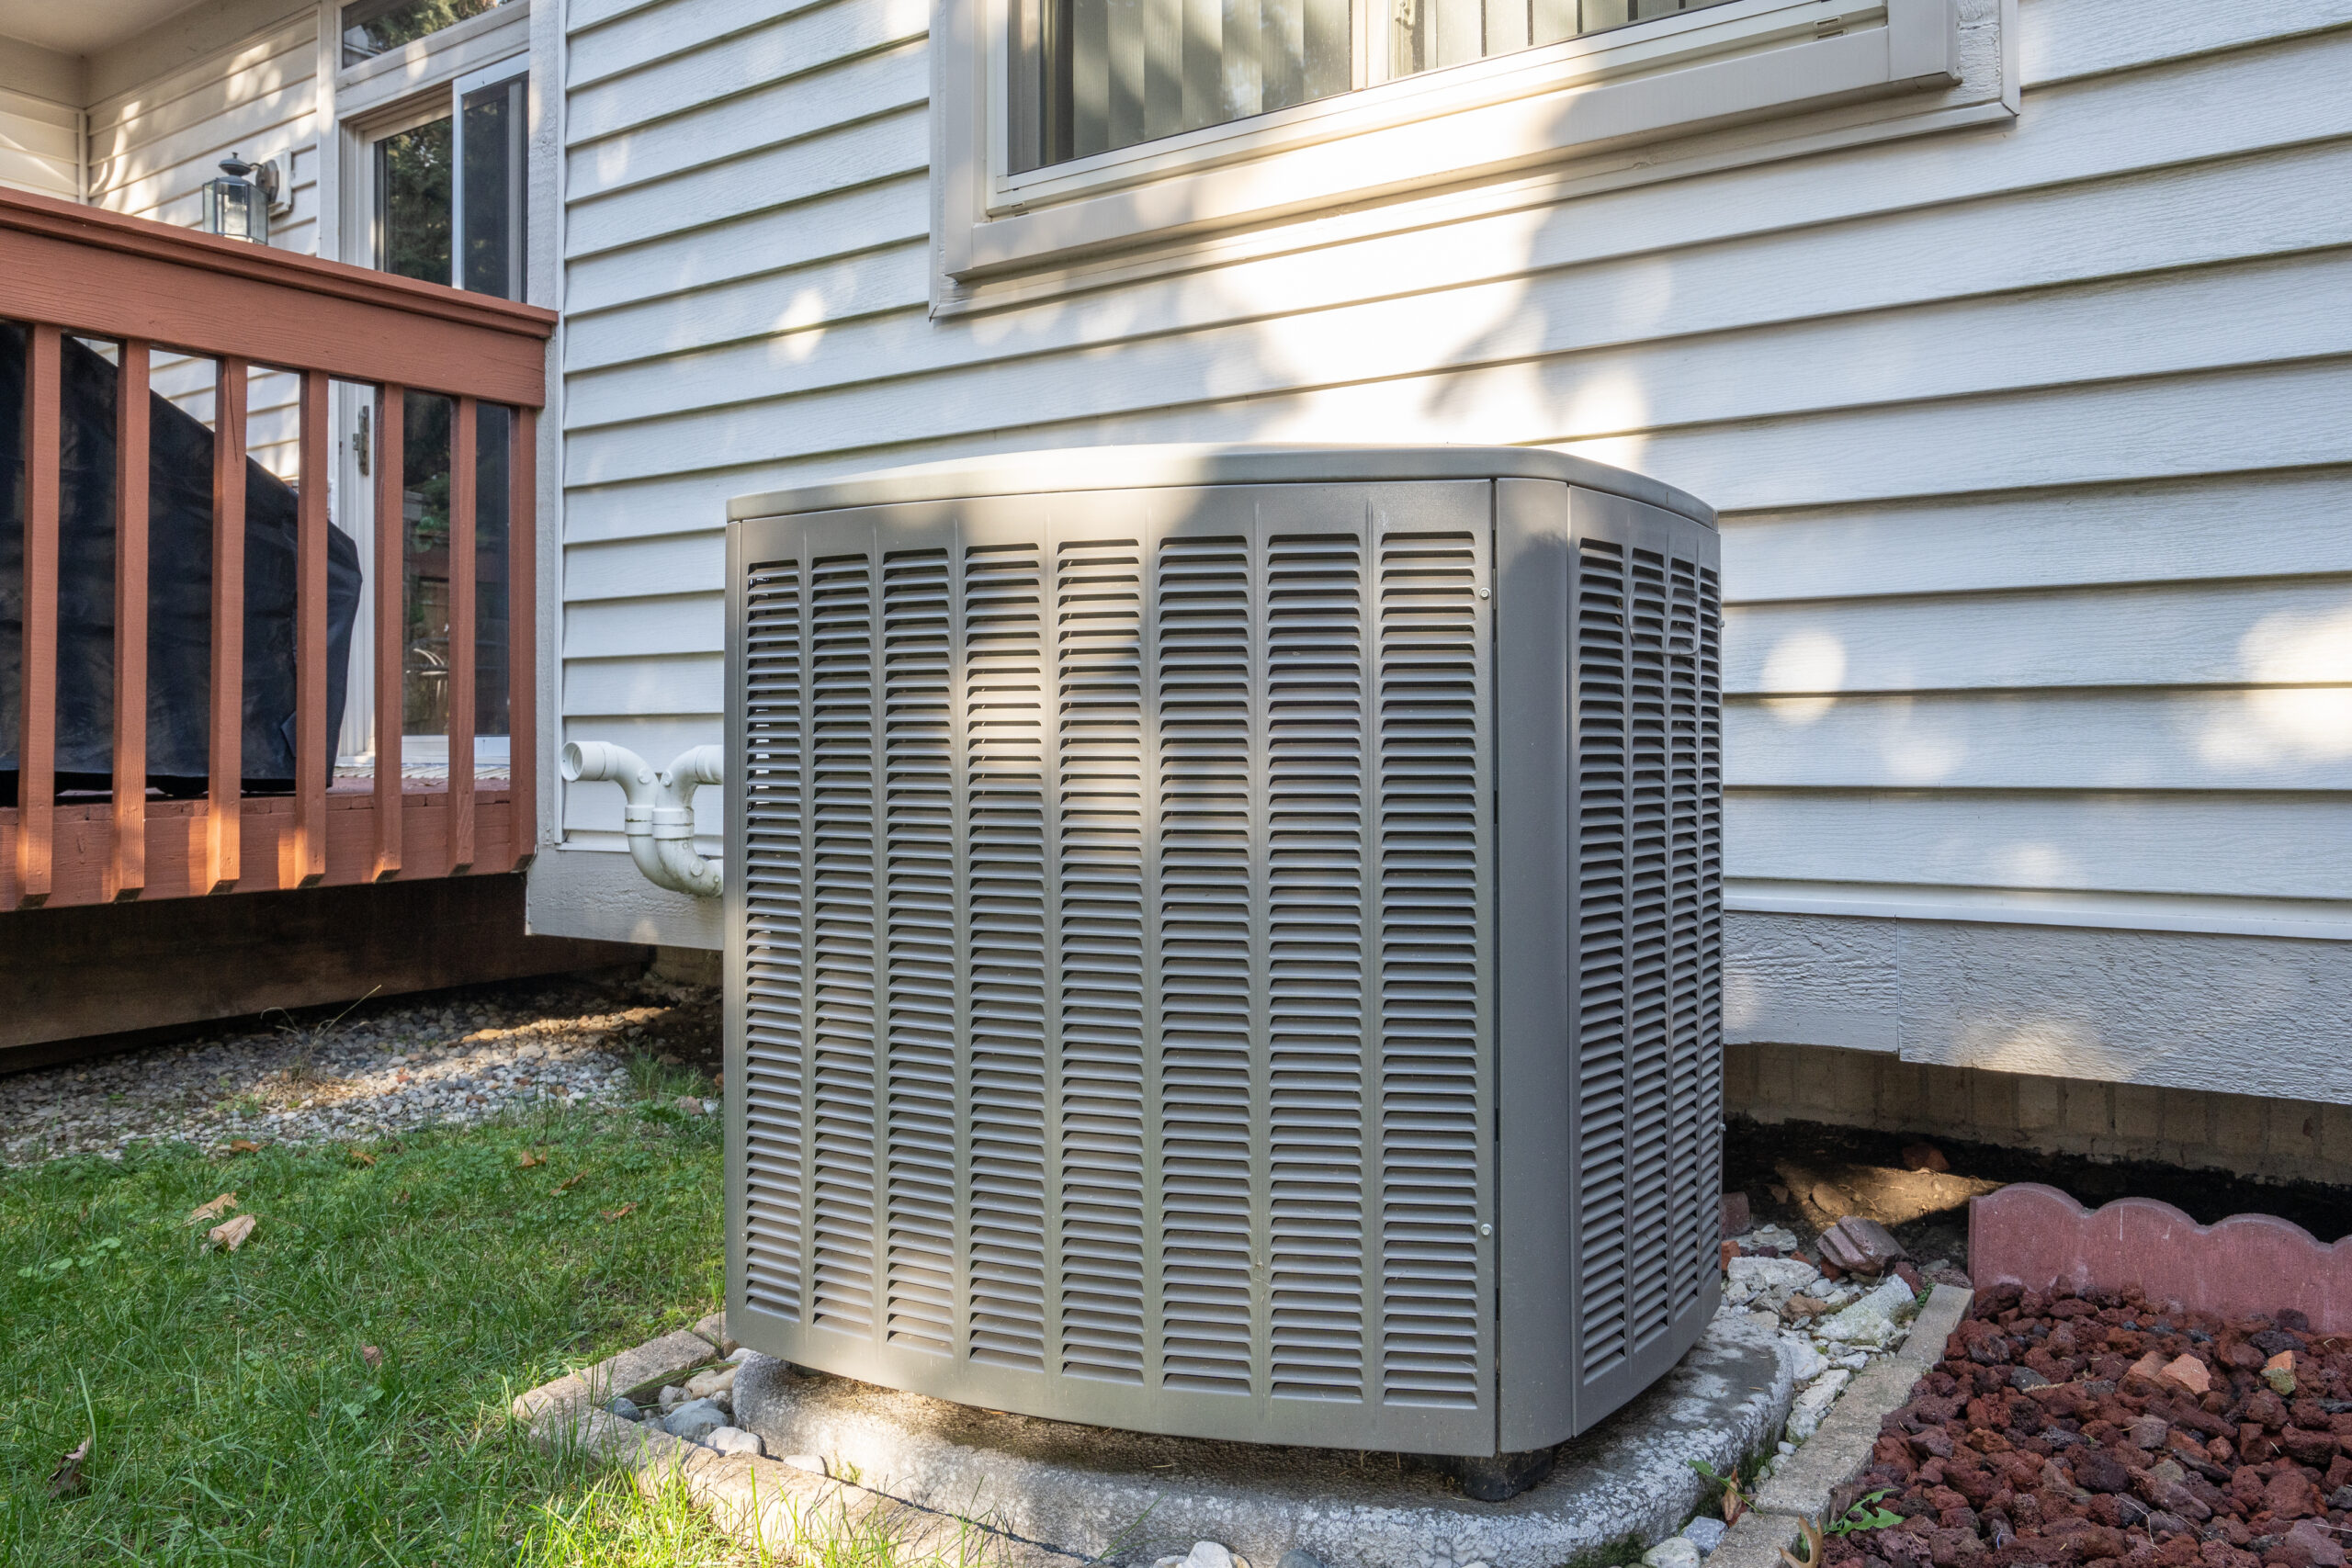 residential air conditioning unit in backyard